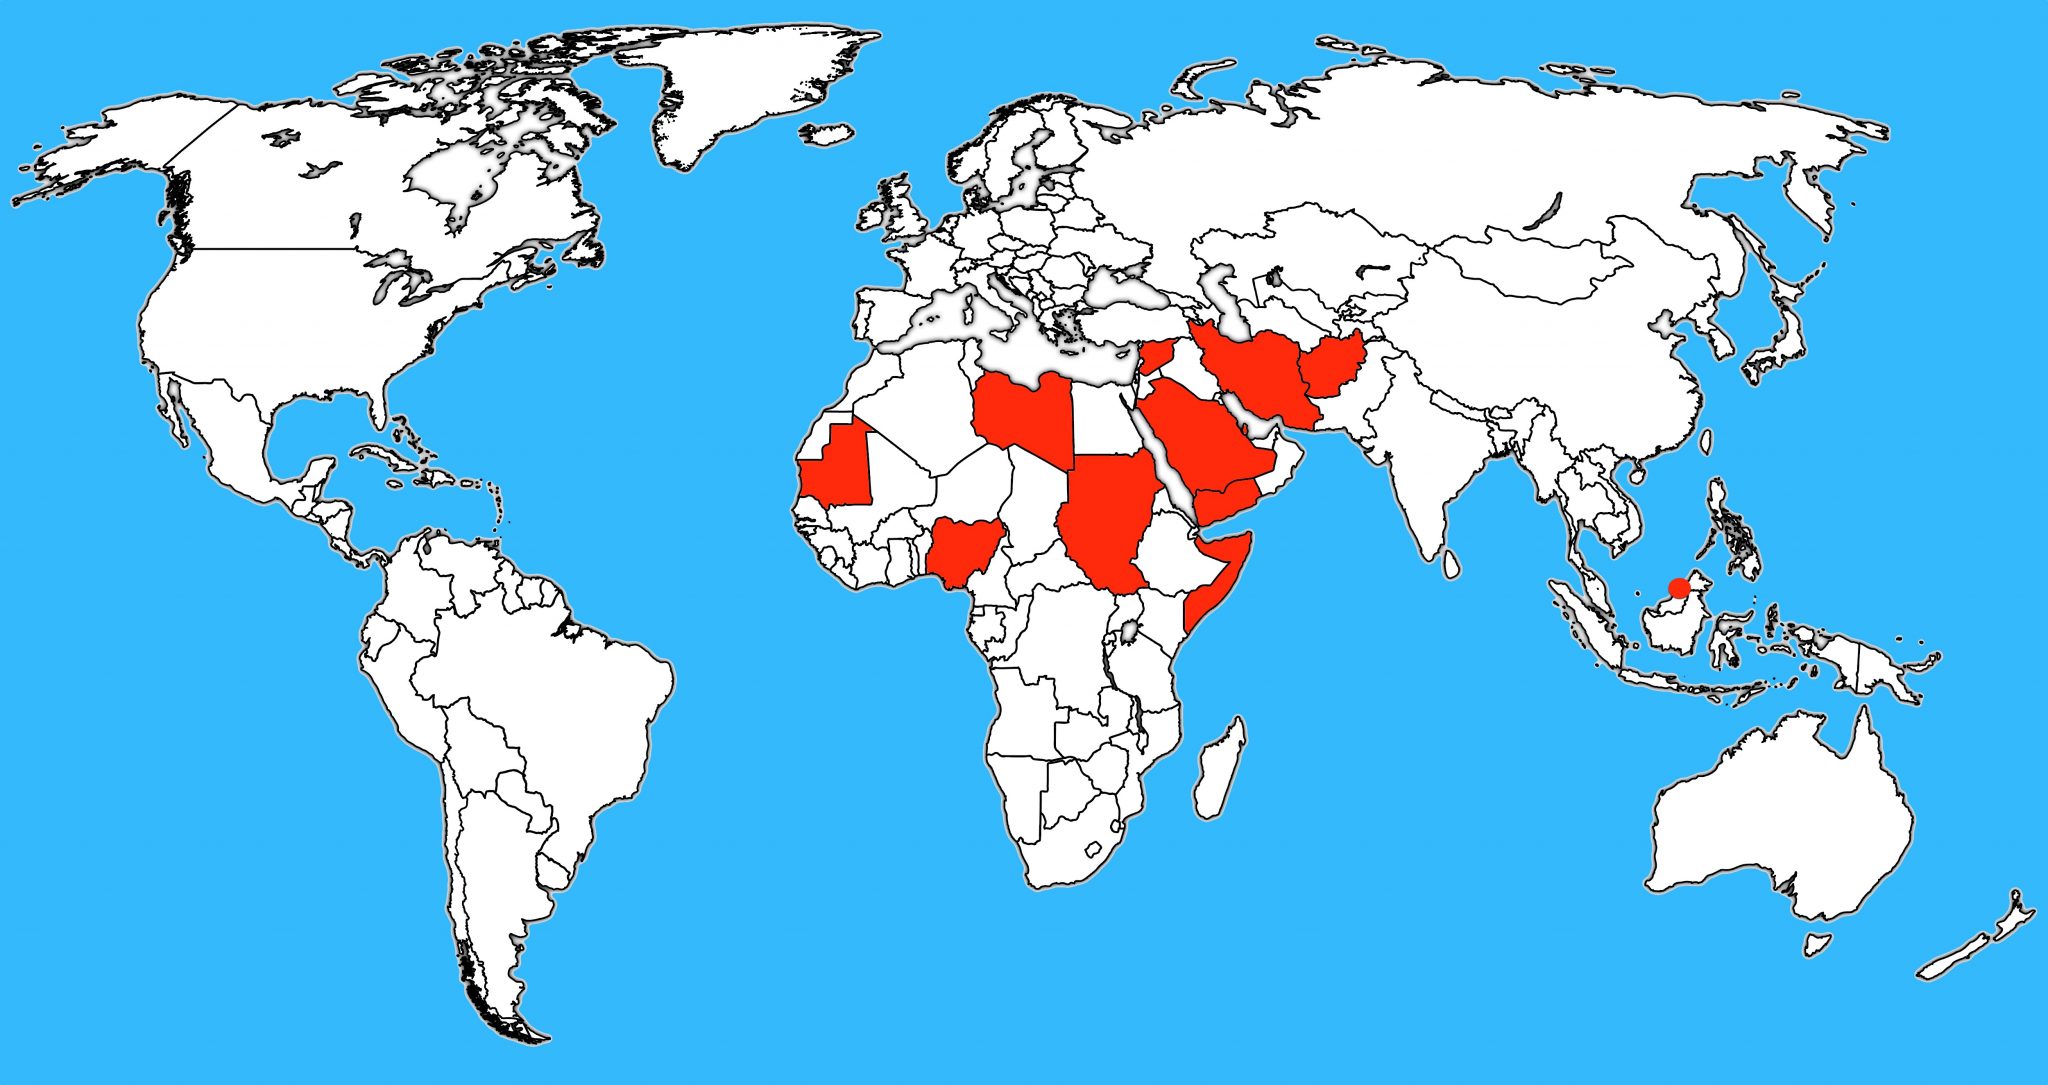 Where In The World Is Homosexuality Punished By The Death Penalty